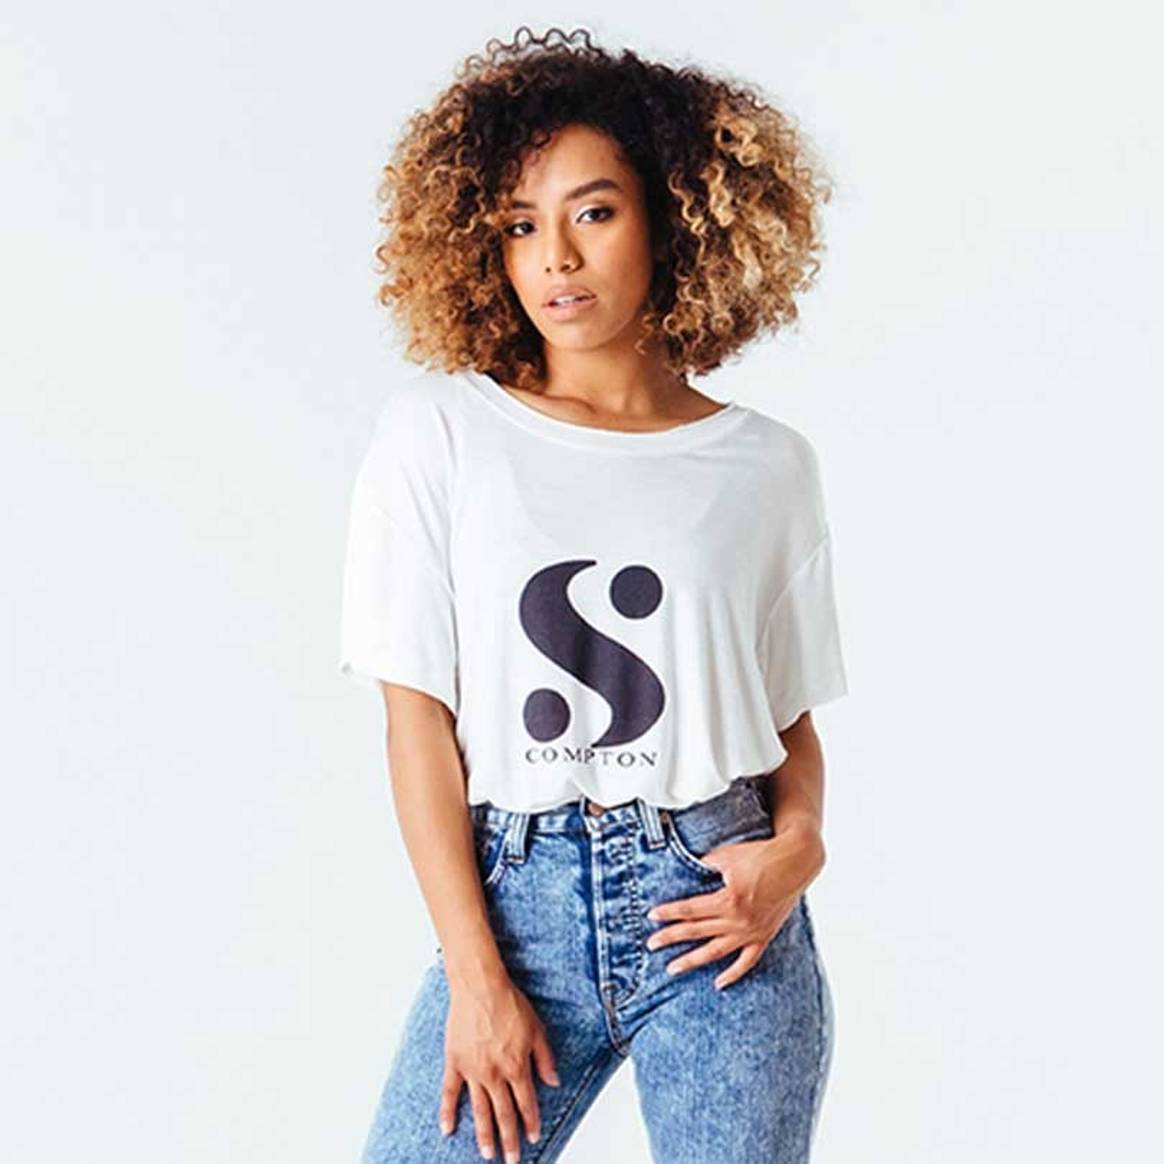 Serena Williams launches new clothing line of affordable looks